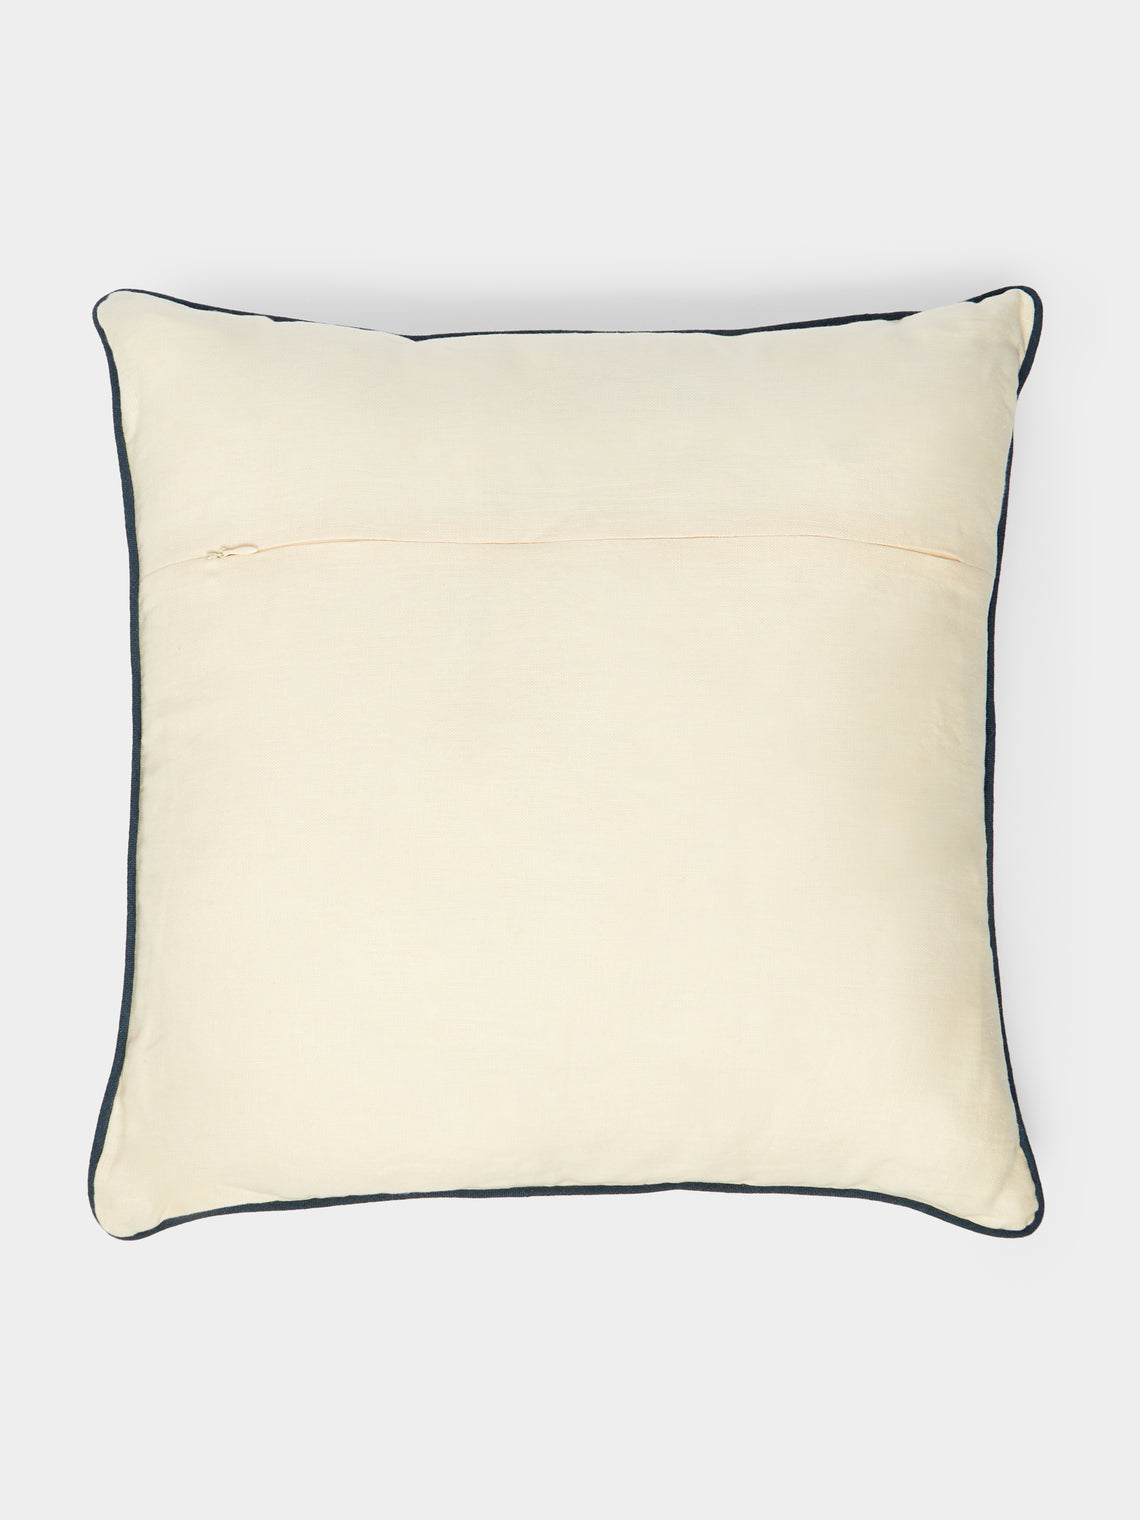 Rosemary Milner - Floral Hand-Embroidered Cotton Cushion -  - ABASK